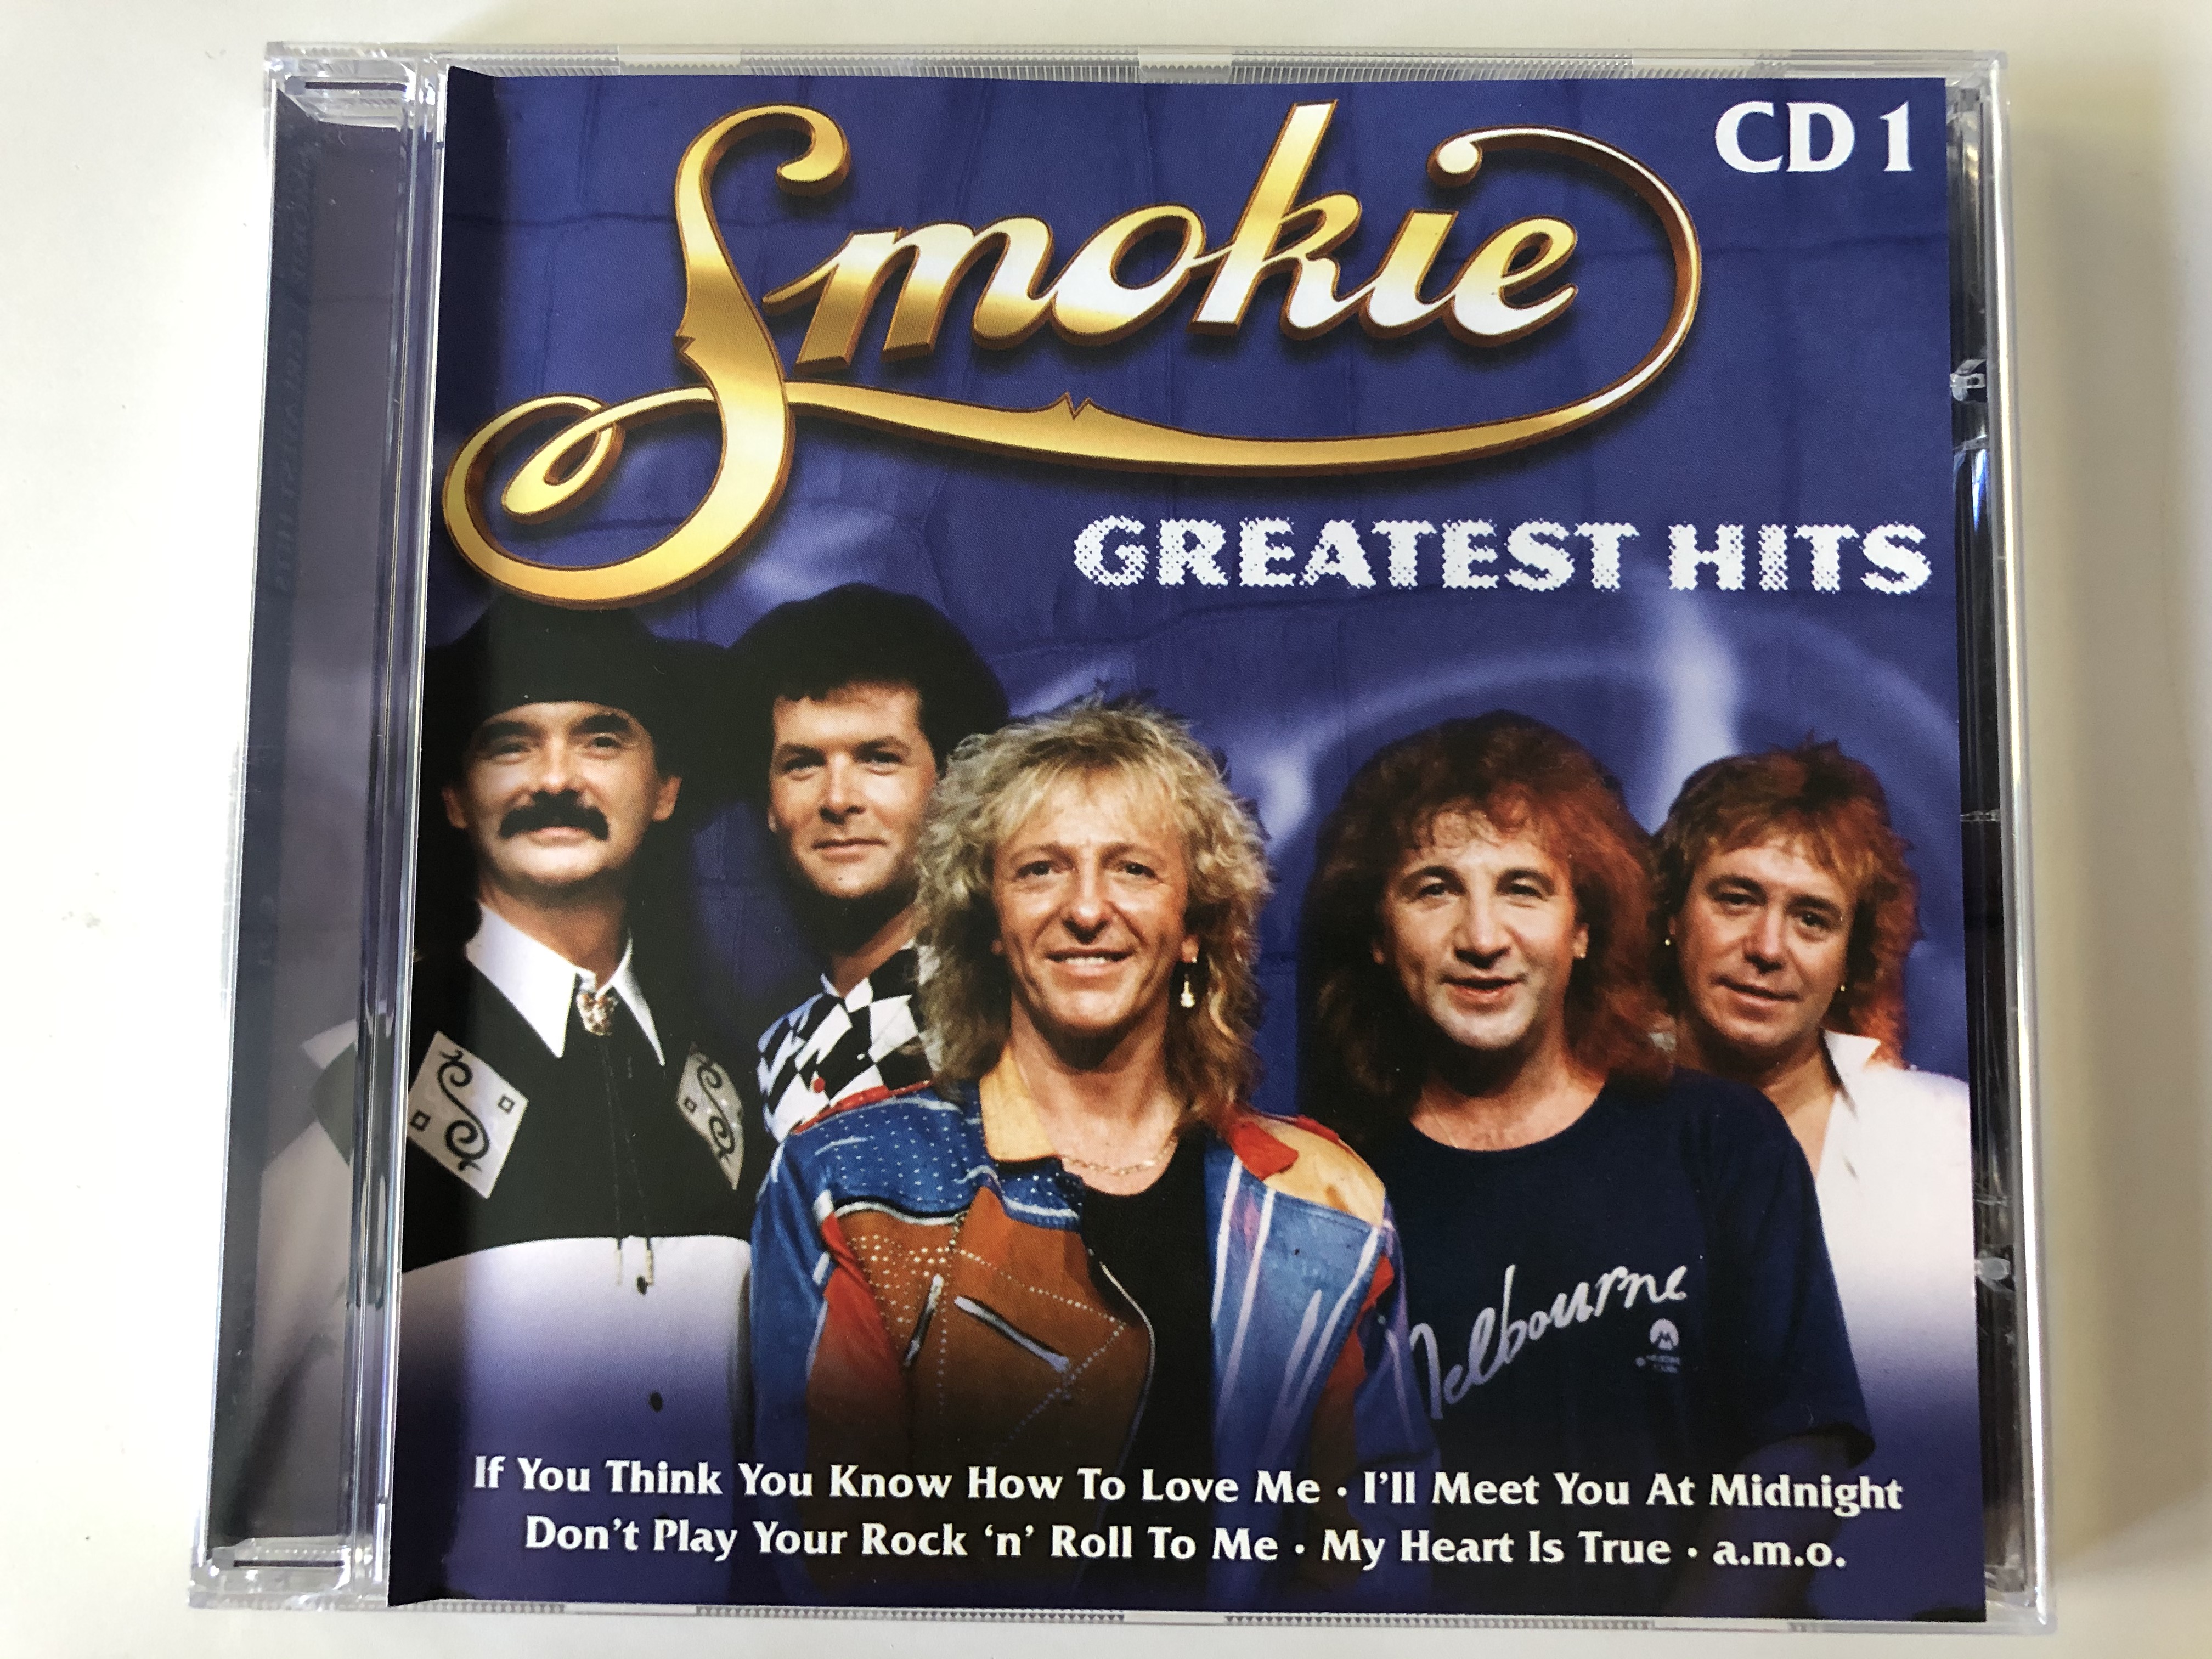 smokie-greatest-hits-cd-1-if-you-think-you-know-how-to-love-me-i-ll-meet-you-at-midnight-don-t-play-your-rock-n-roll-to-me-my-heart-is-true-a.m.o.-eurotrend-audio-cd-cd-141-1-.jpg